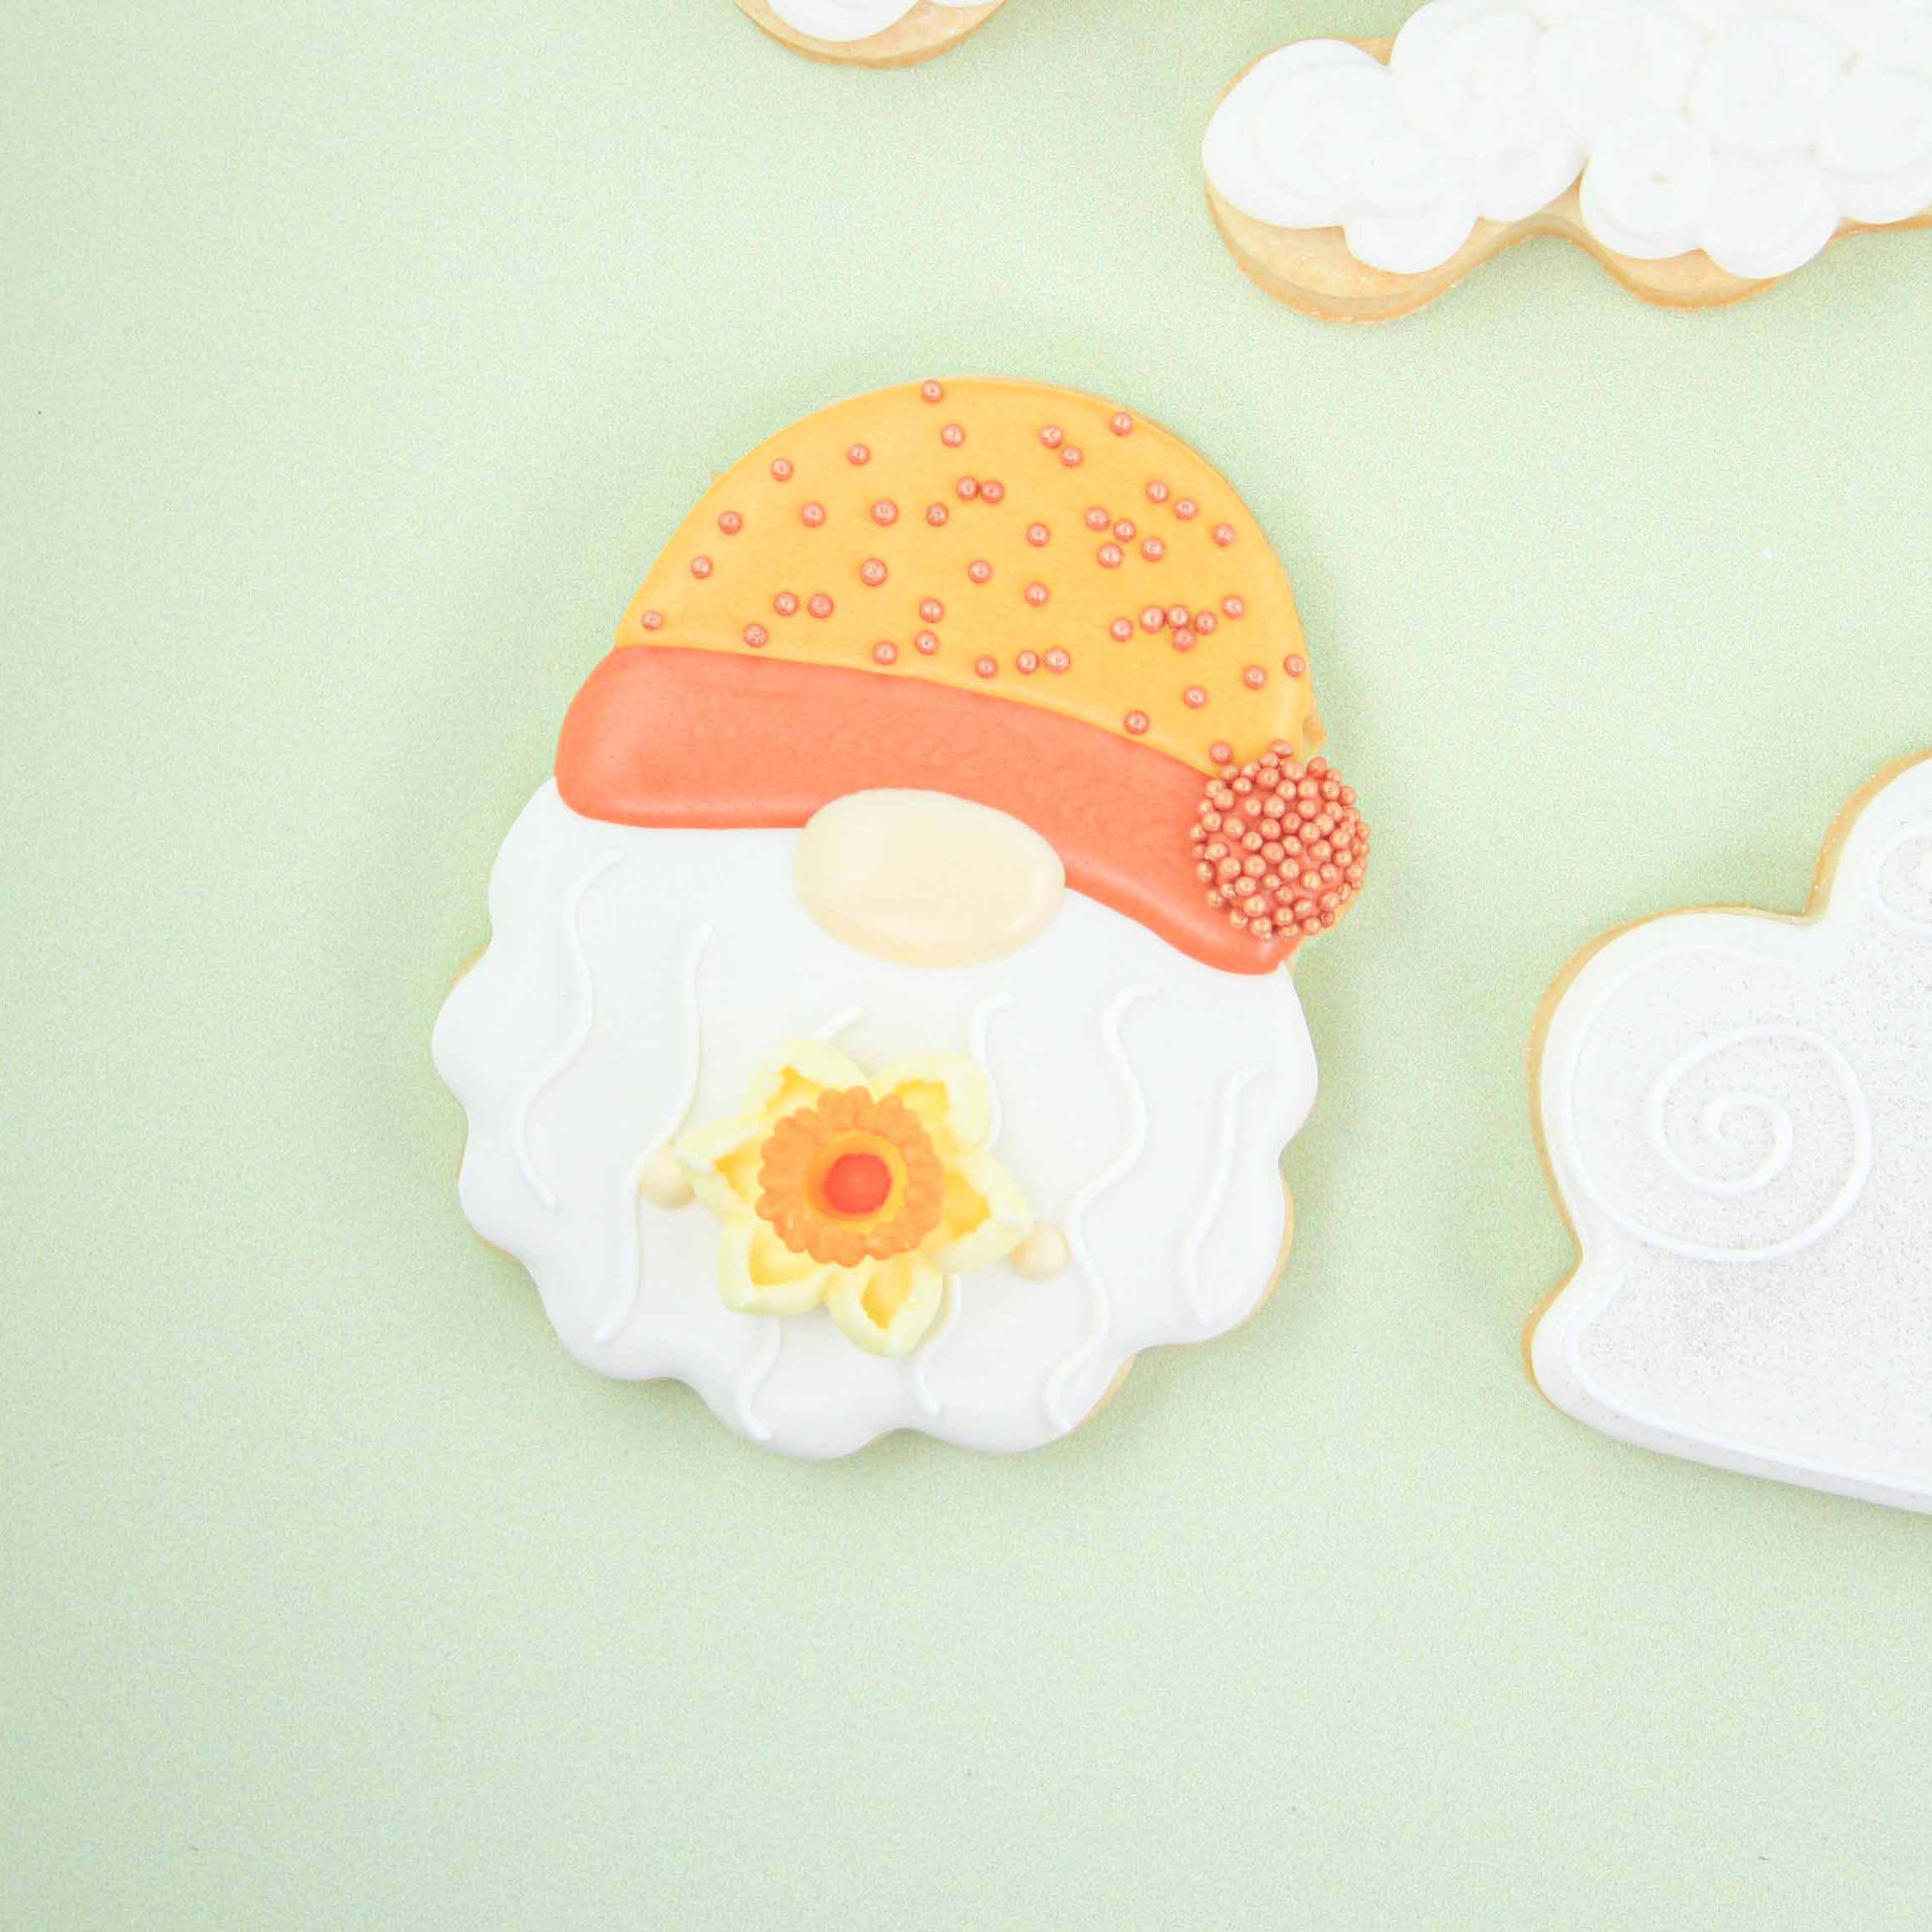 Gnome Cookie with a yellow and orange hat, whimsical white beard and a daffodil decorated in royal icing